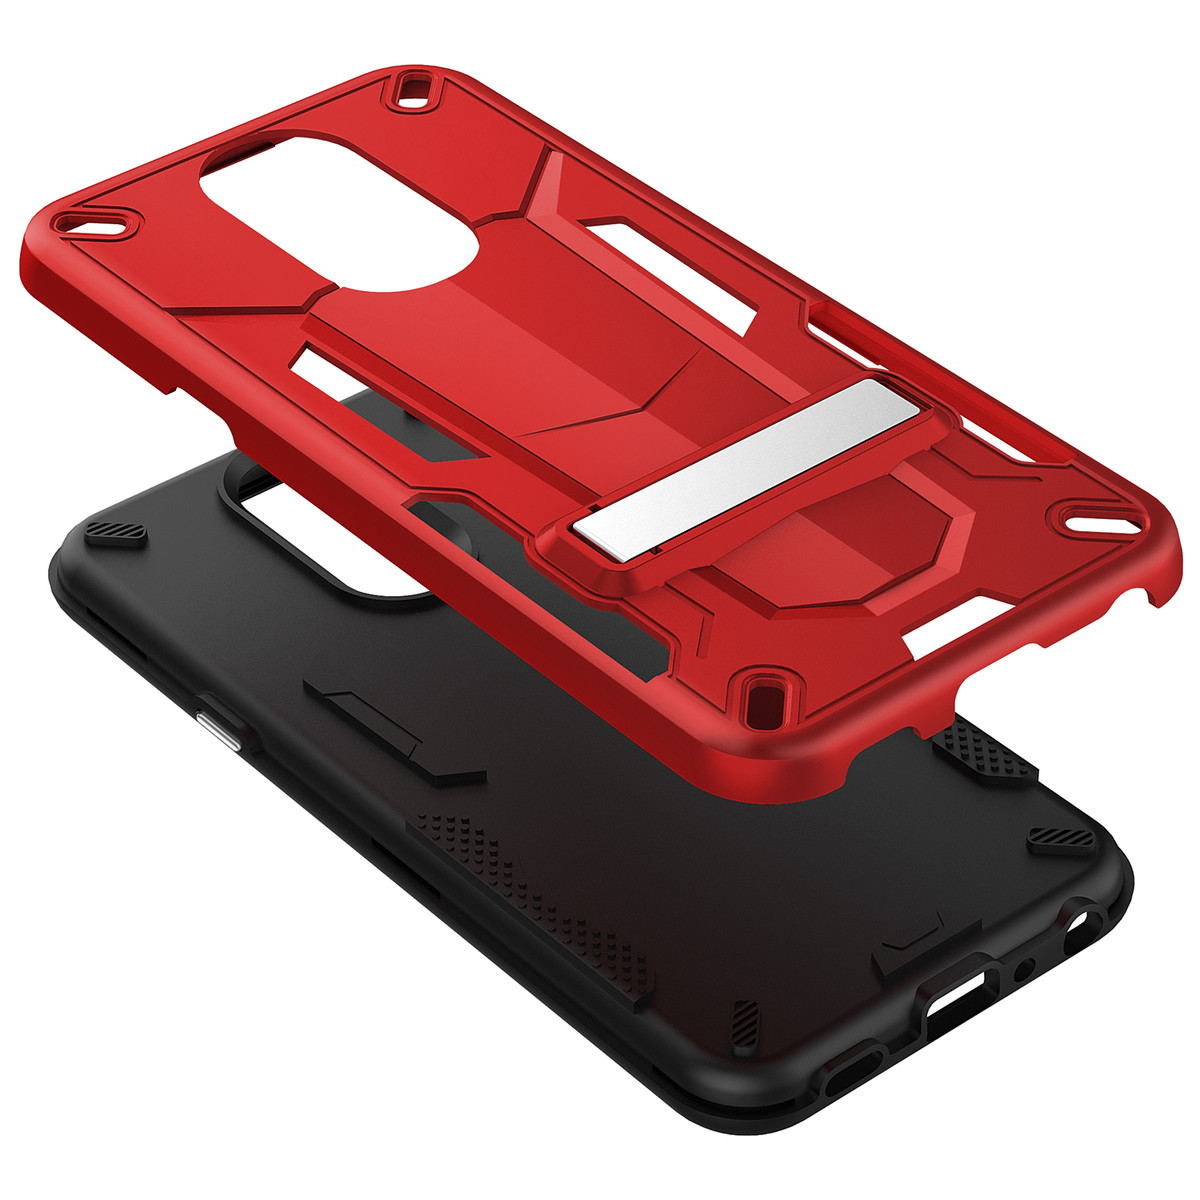 LG K40 / LG Harmony 3 Case - Transm Series by Zizo with Kickstand and UV Coated PC/TPU Layers - Red (4518)